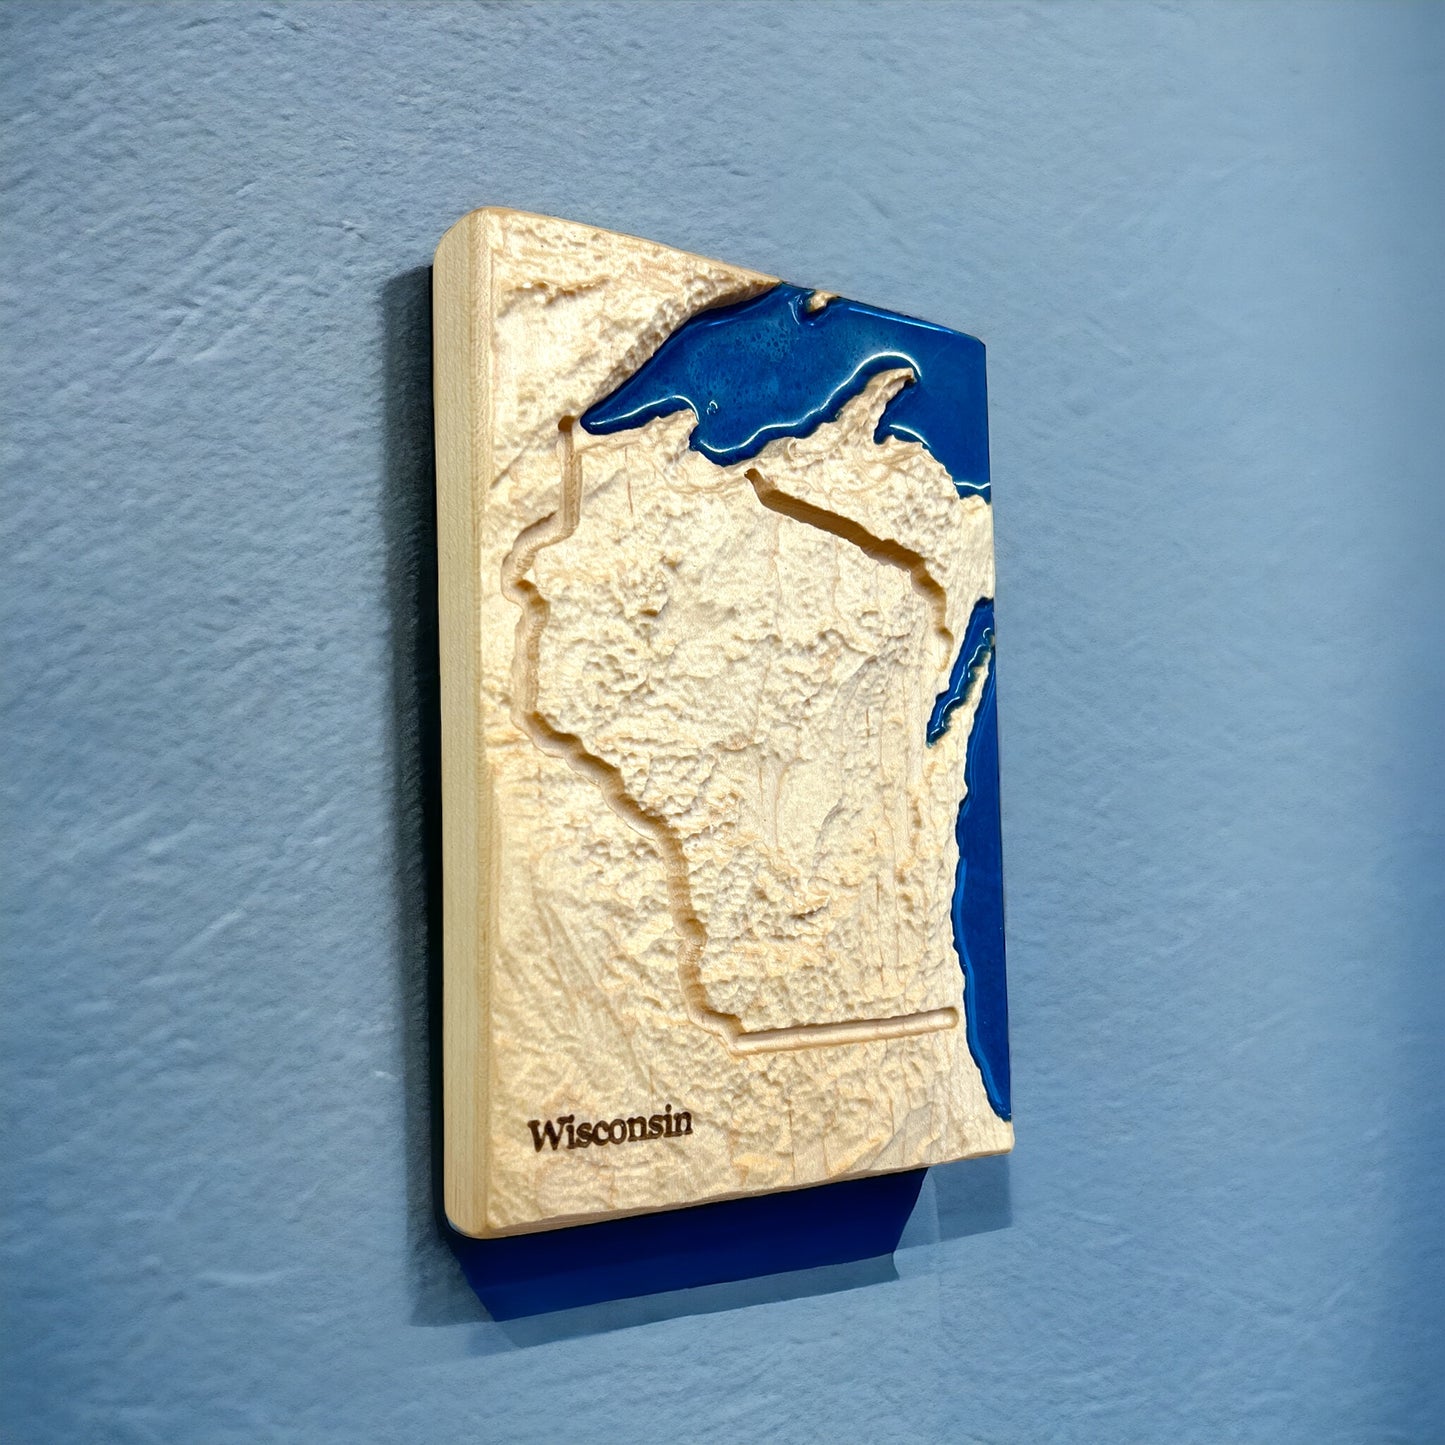 Wisconsin Map | Wisconsin Wood Carved Relief Map | Wisconsin Gift | Wisconsin Art | Wisconsin Home Decor | 3D Topographic Wood Map Wisconsin